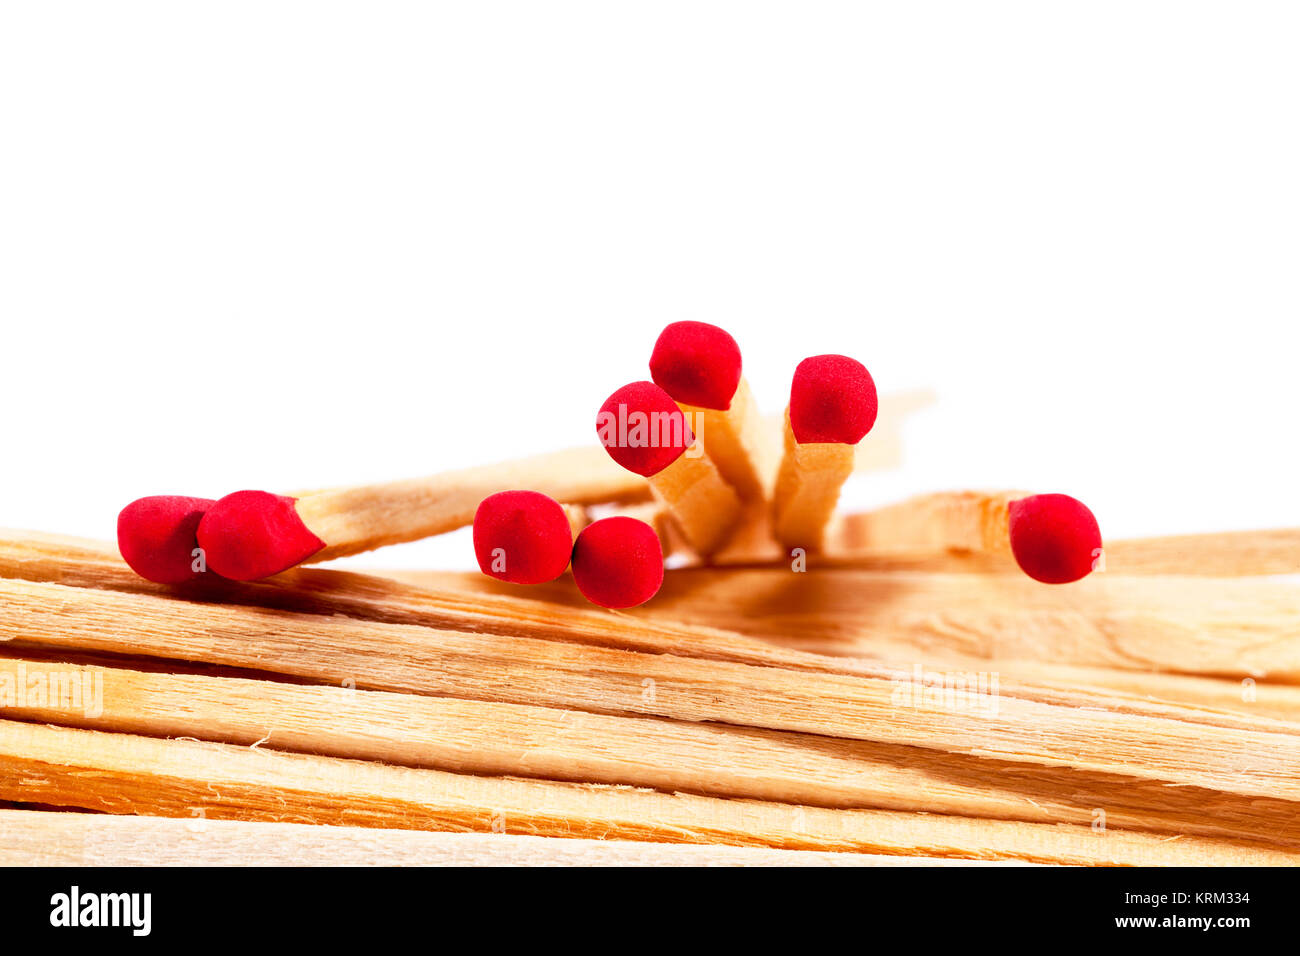 Heap of matches with rad heads isolated on white background Stock Photo